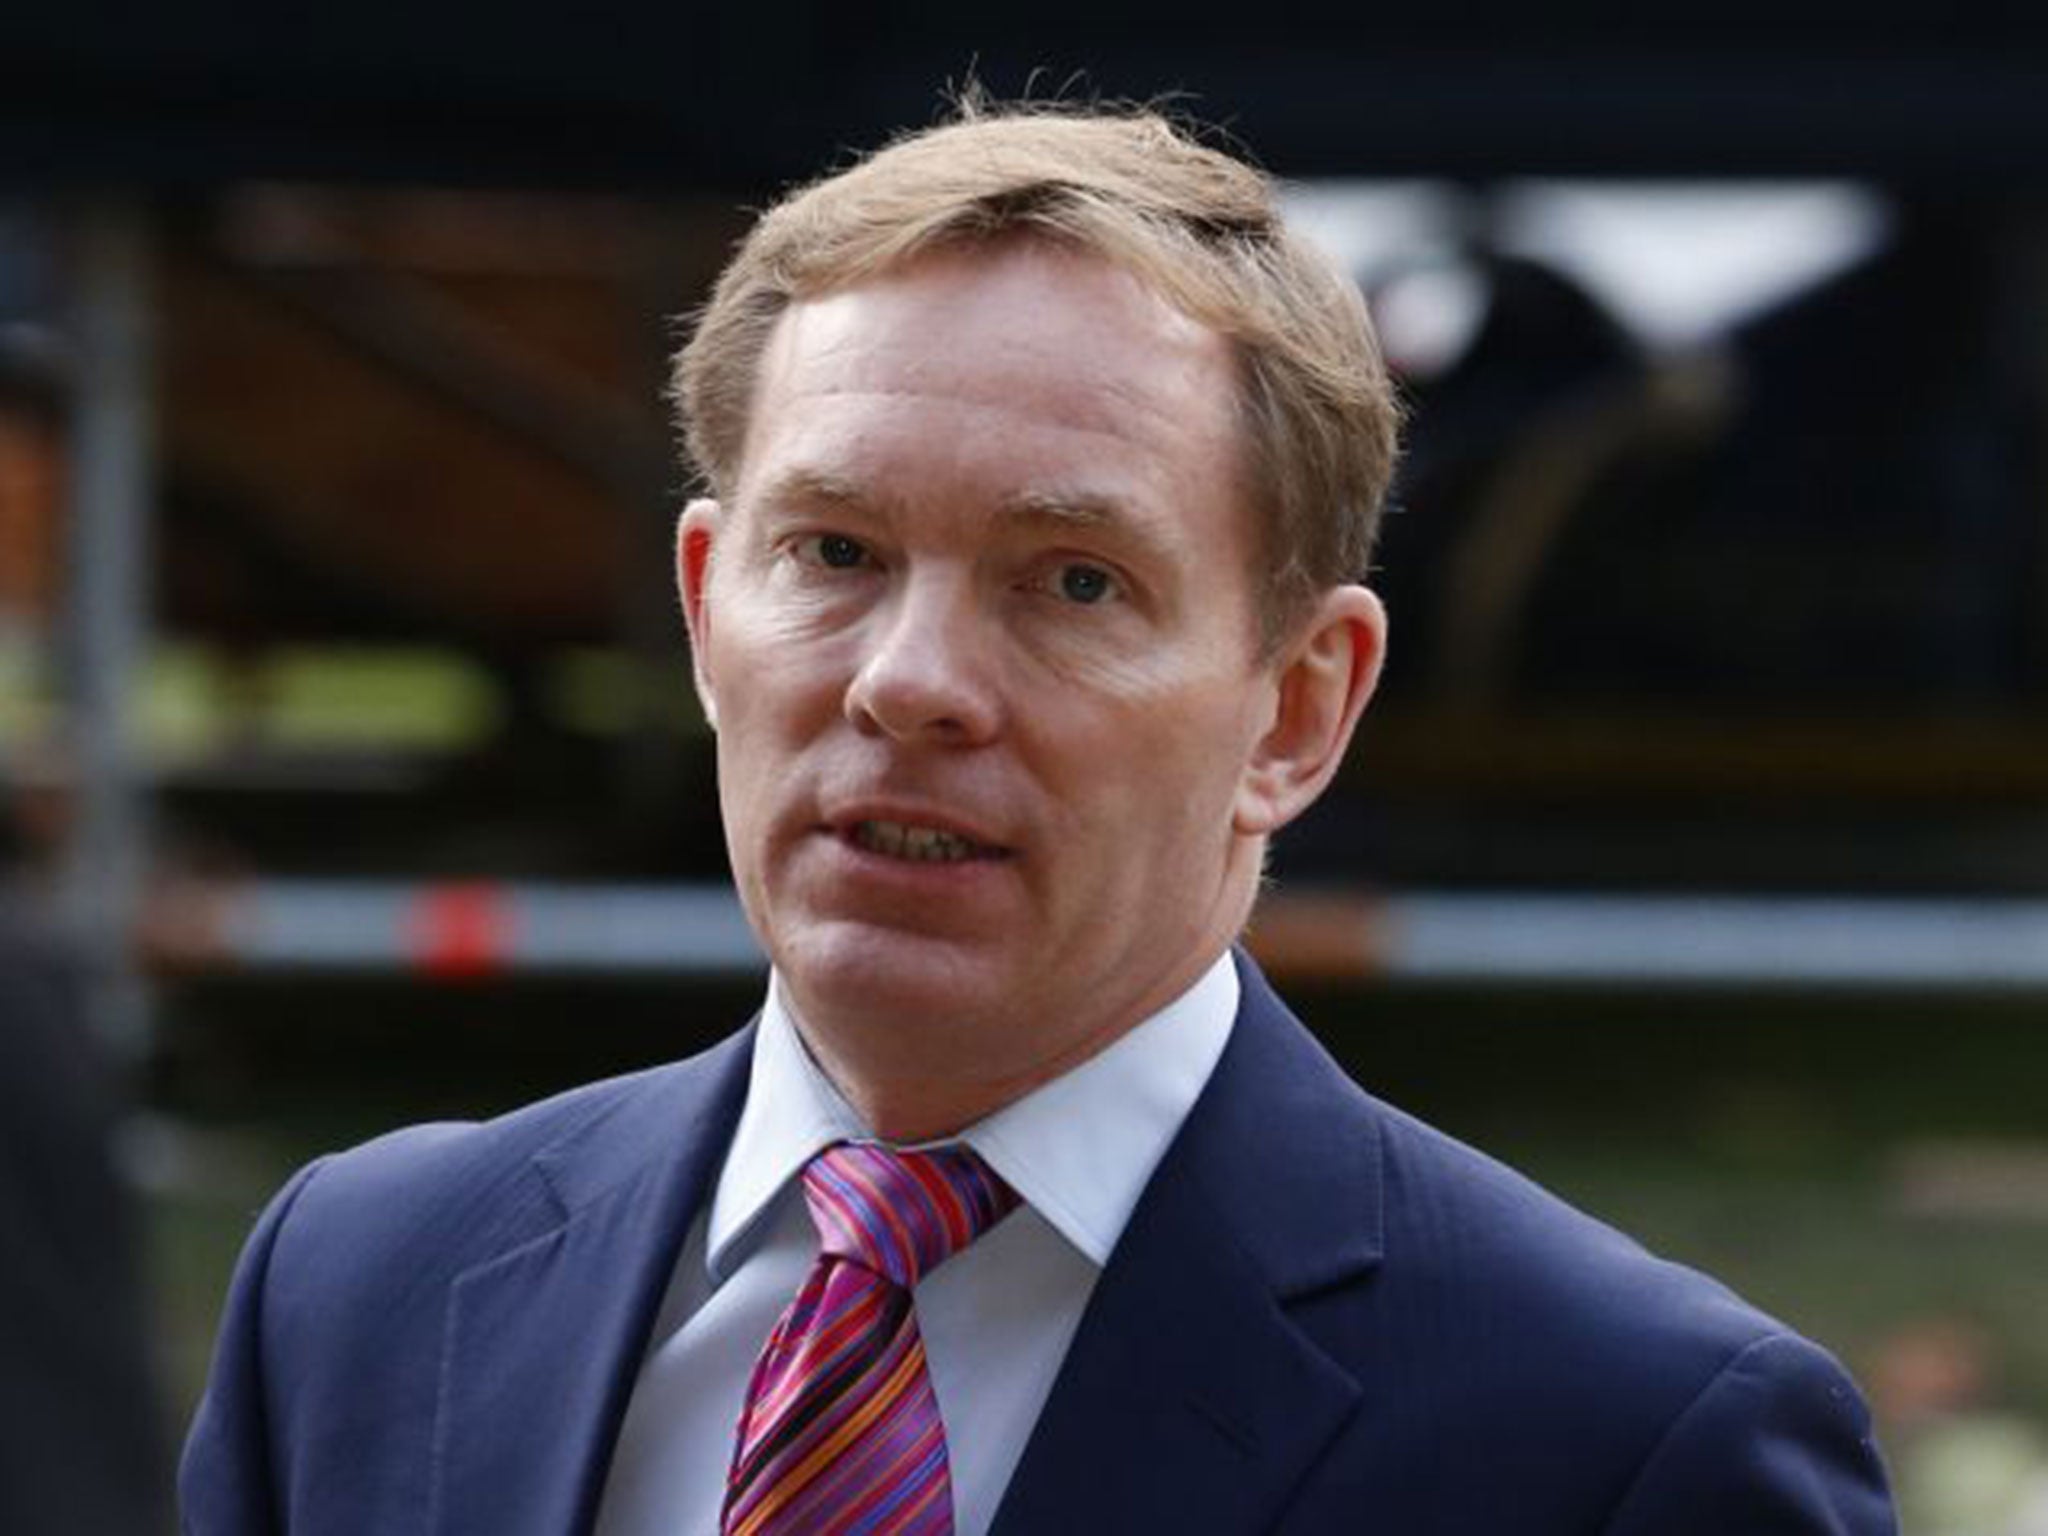 Chris Bryant was responding to David Cameron's remarks, made during PMQs